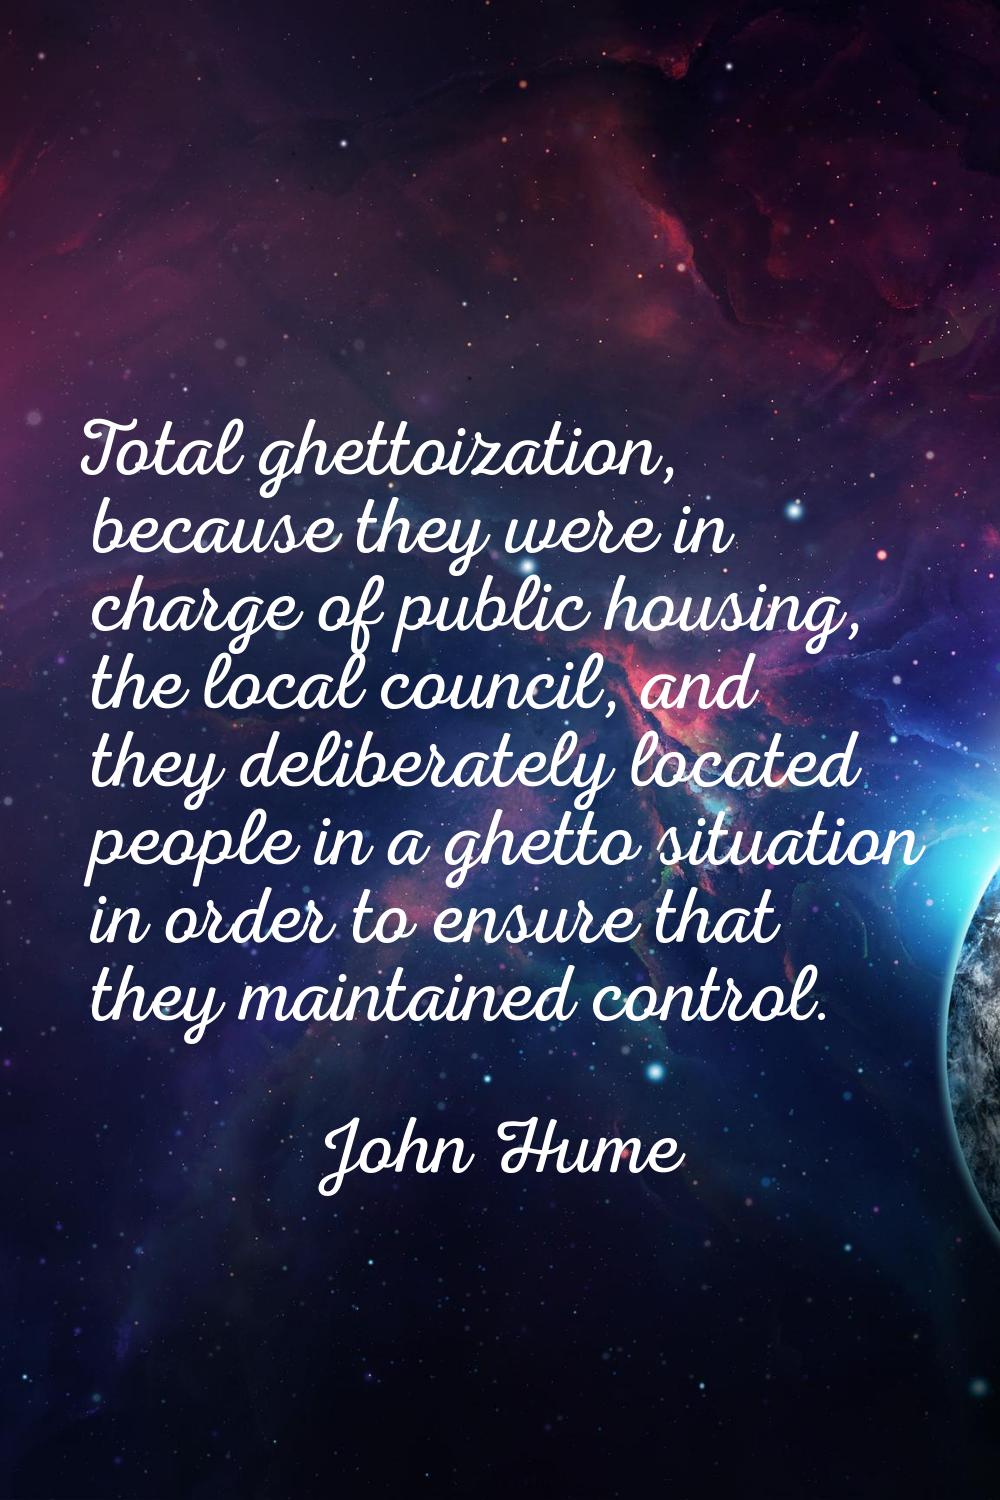 Total ghettoization, because they were in charge of public housing, the local council, and they del